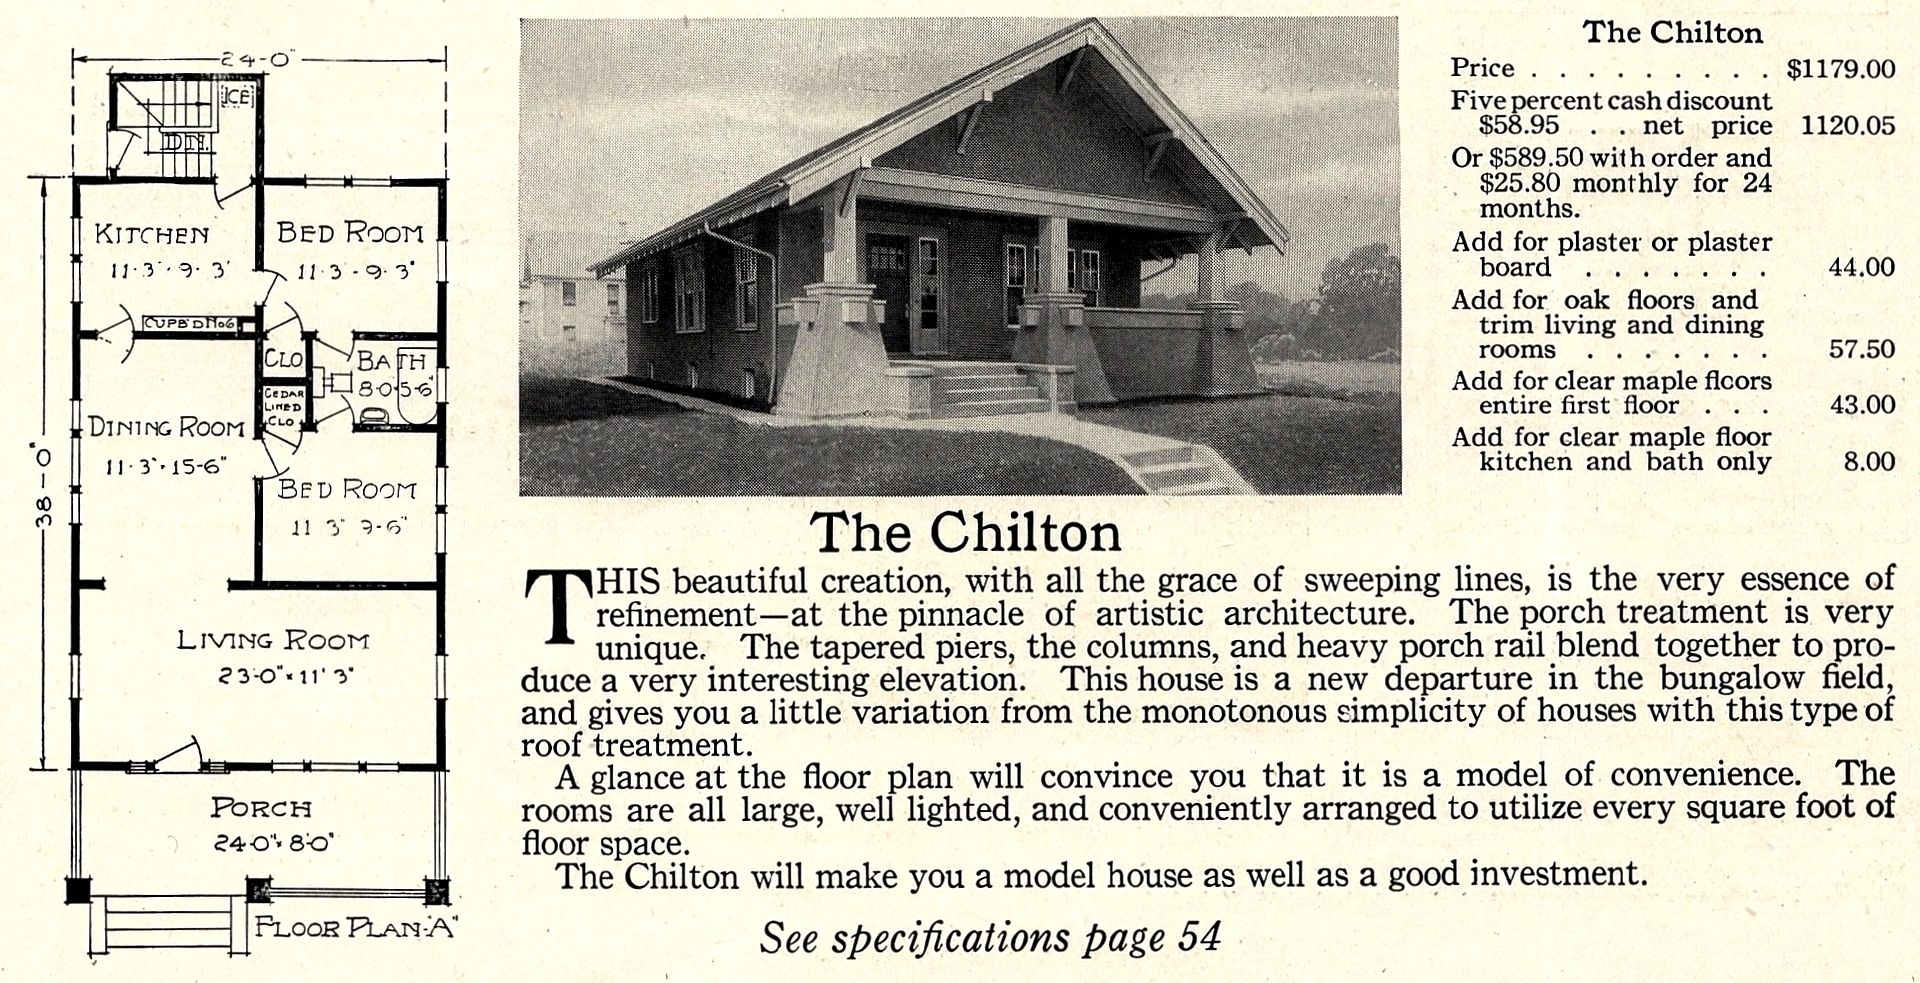 The Sterling Chilton, from the 1917 Sterling Homes catalog. 